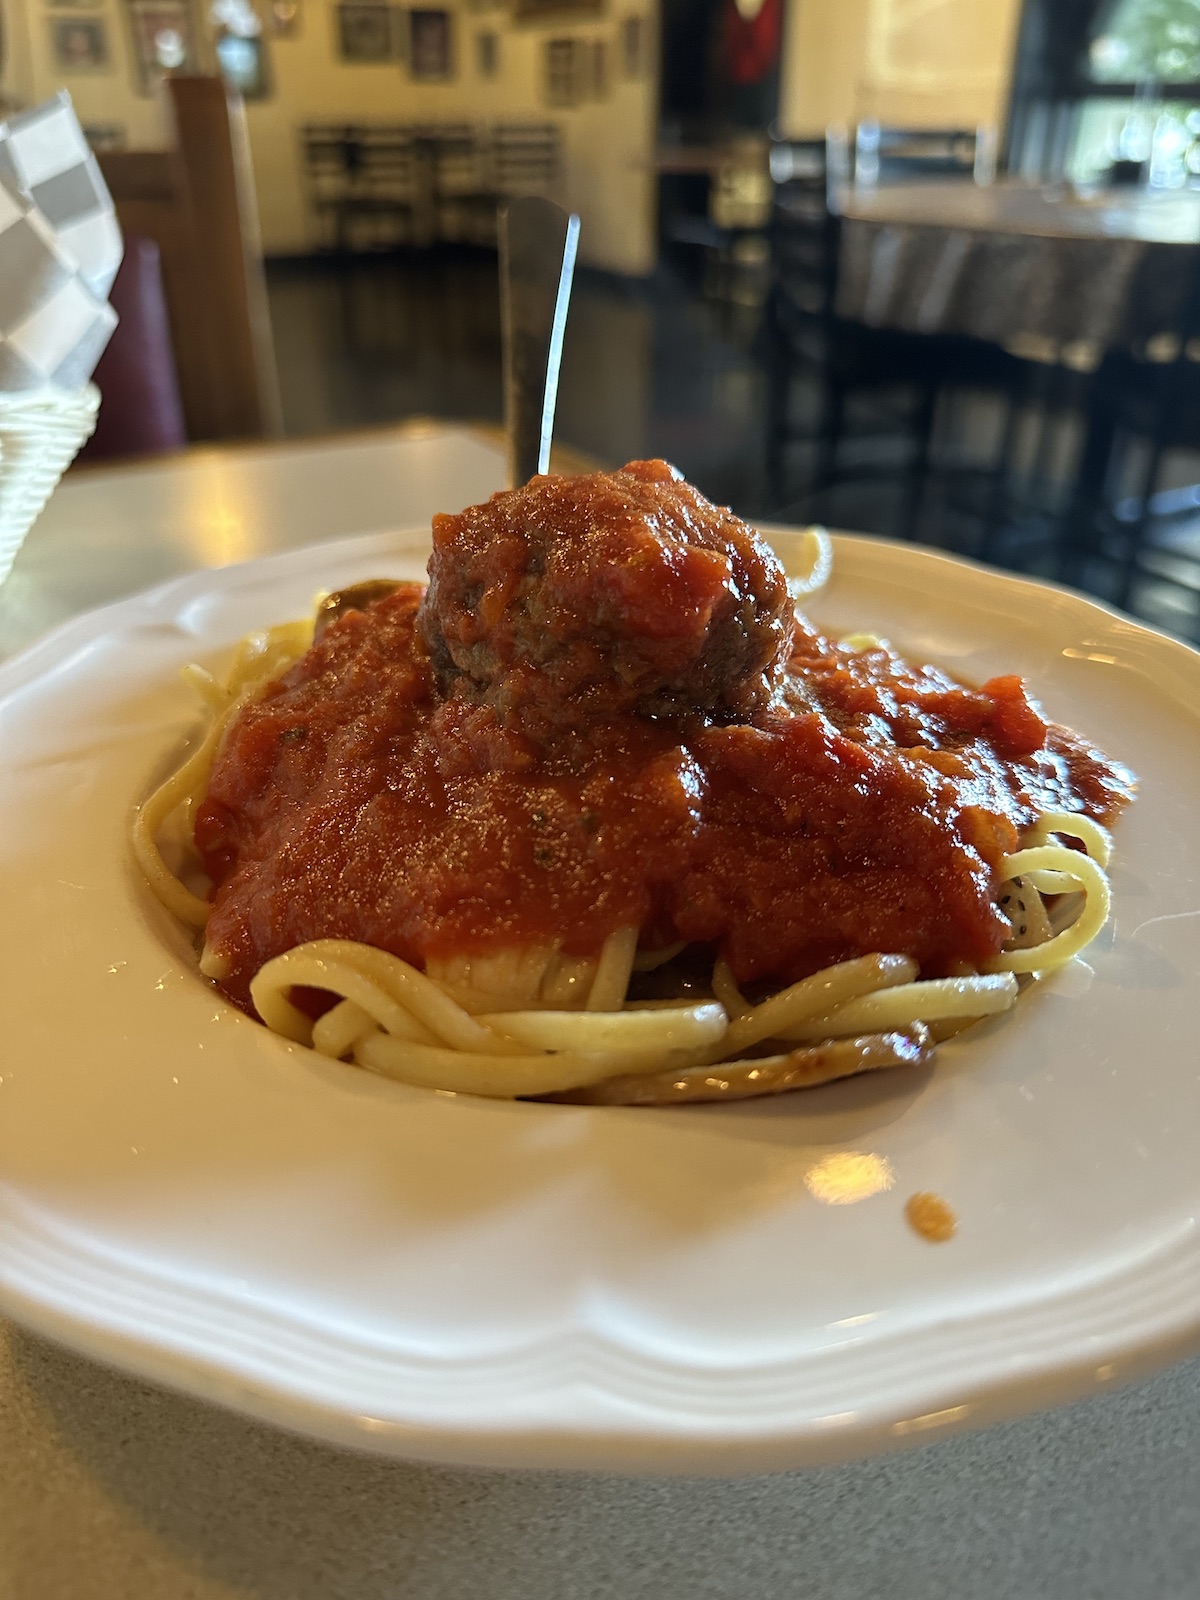 Deluxe Pasta with linguine, spicy Italian sausage, chicken, a homemade meatball, and marinara sauce, served at The Italian Oven in Somerset, PA.